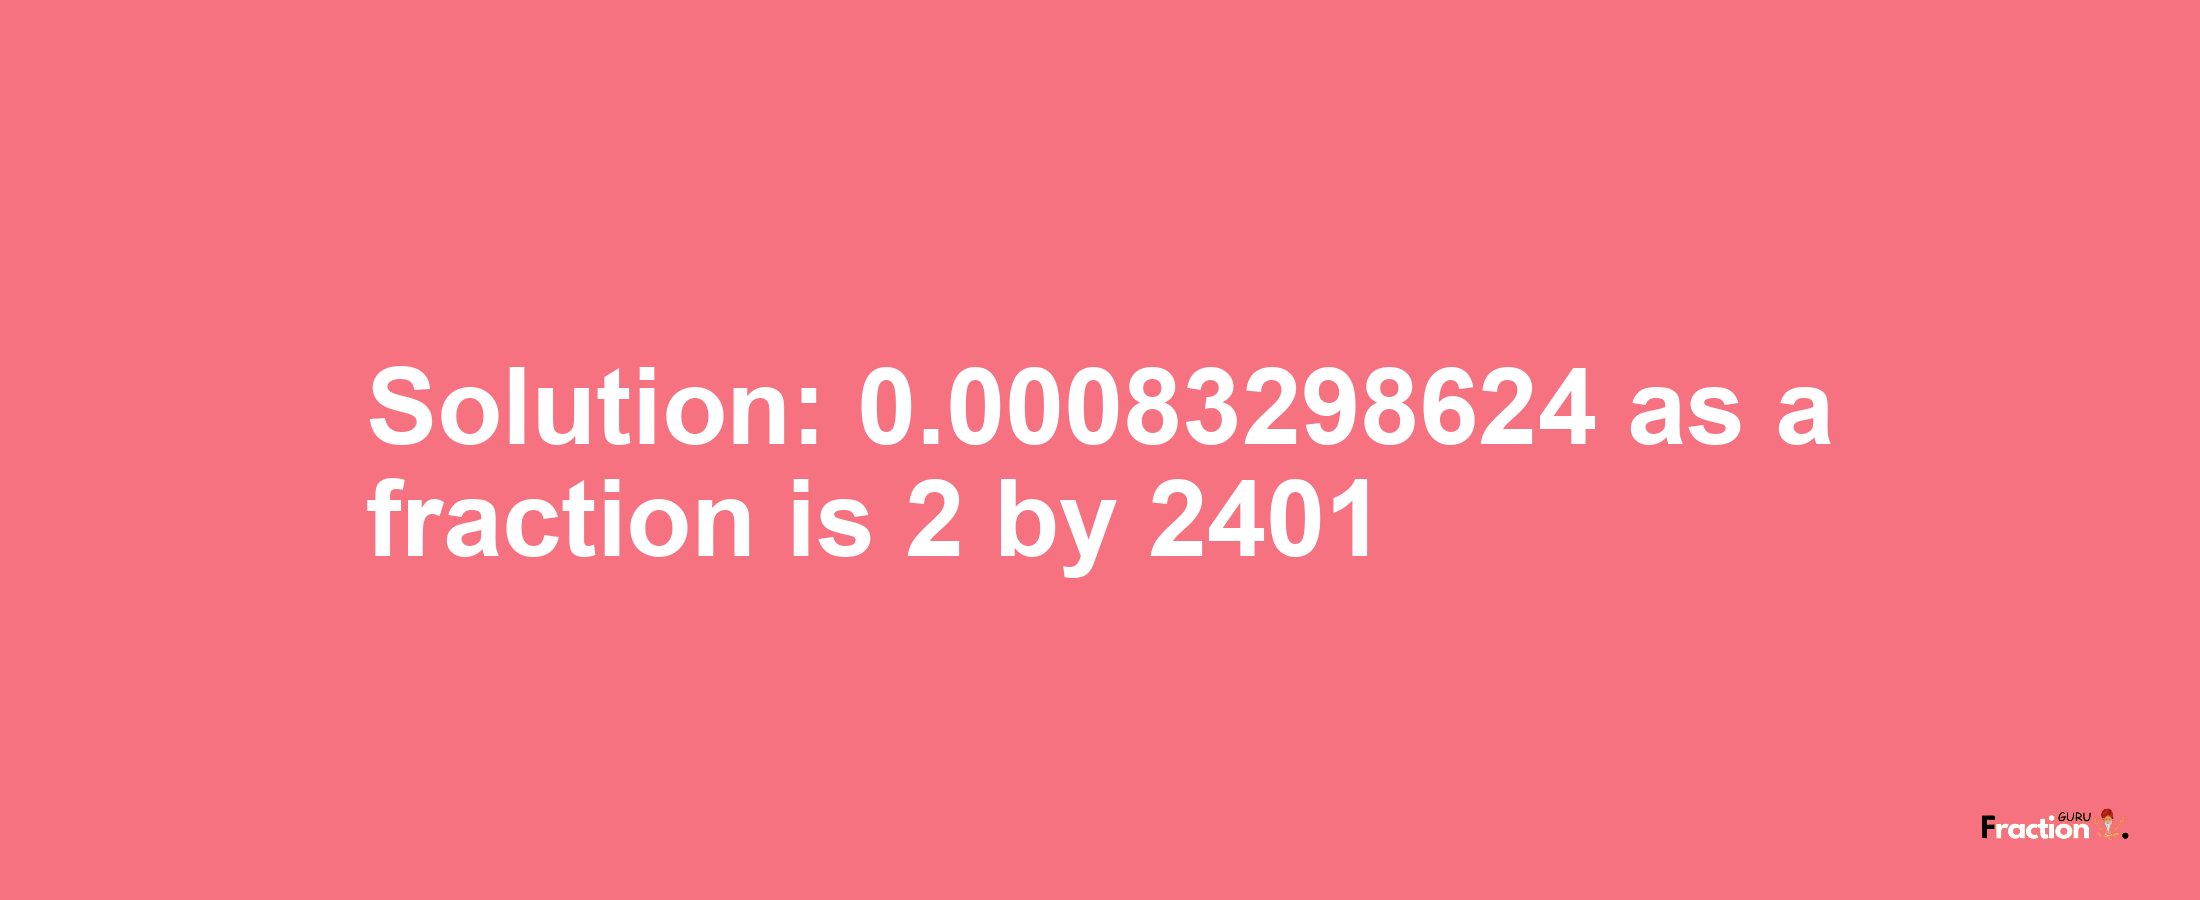 Solution:0.00083298624 as a fraction is 2/2401